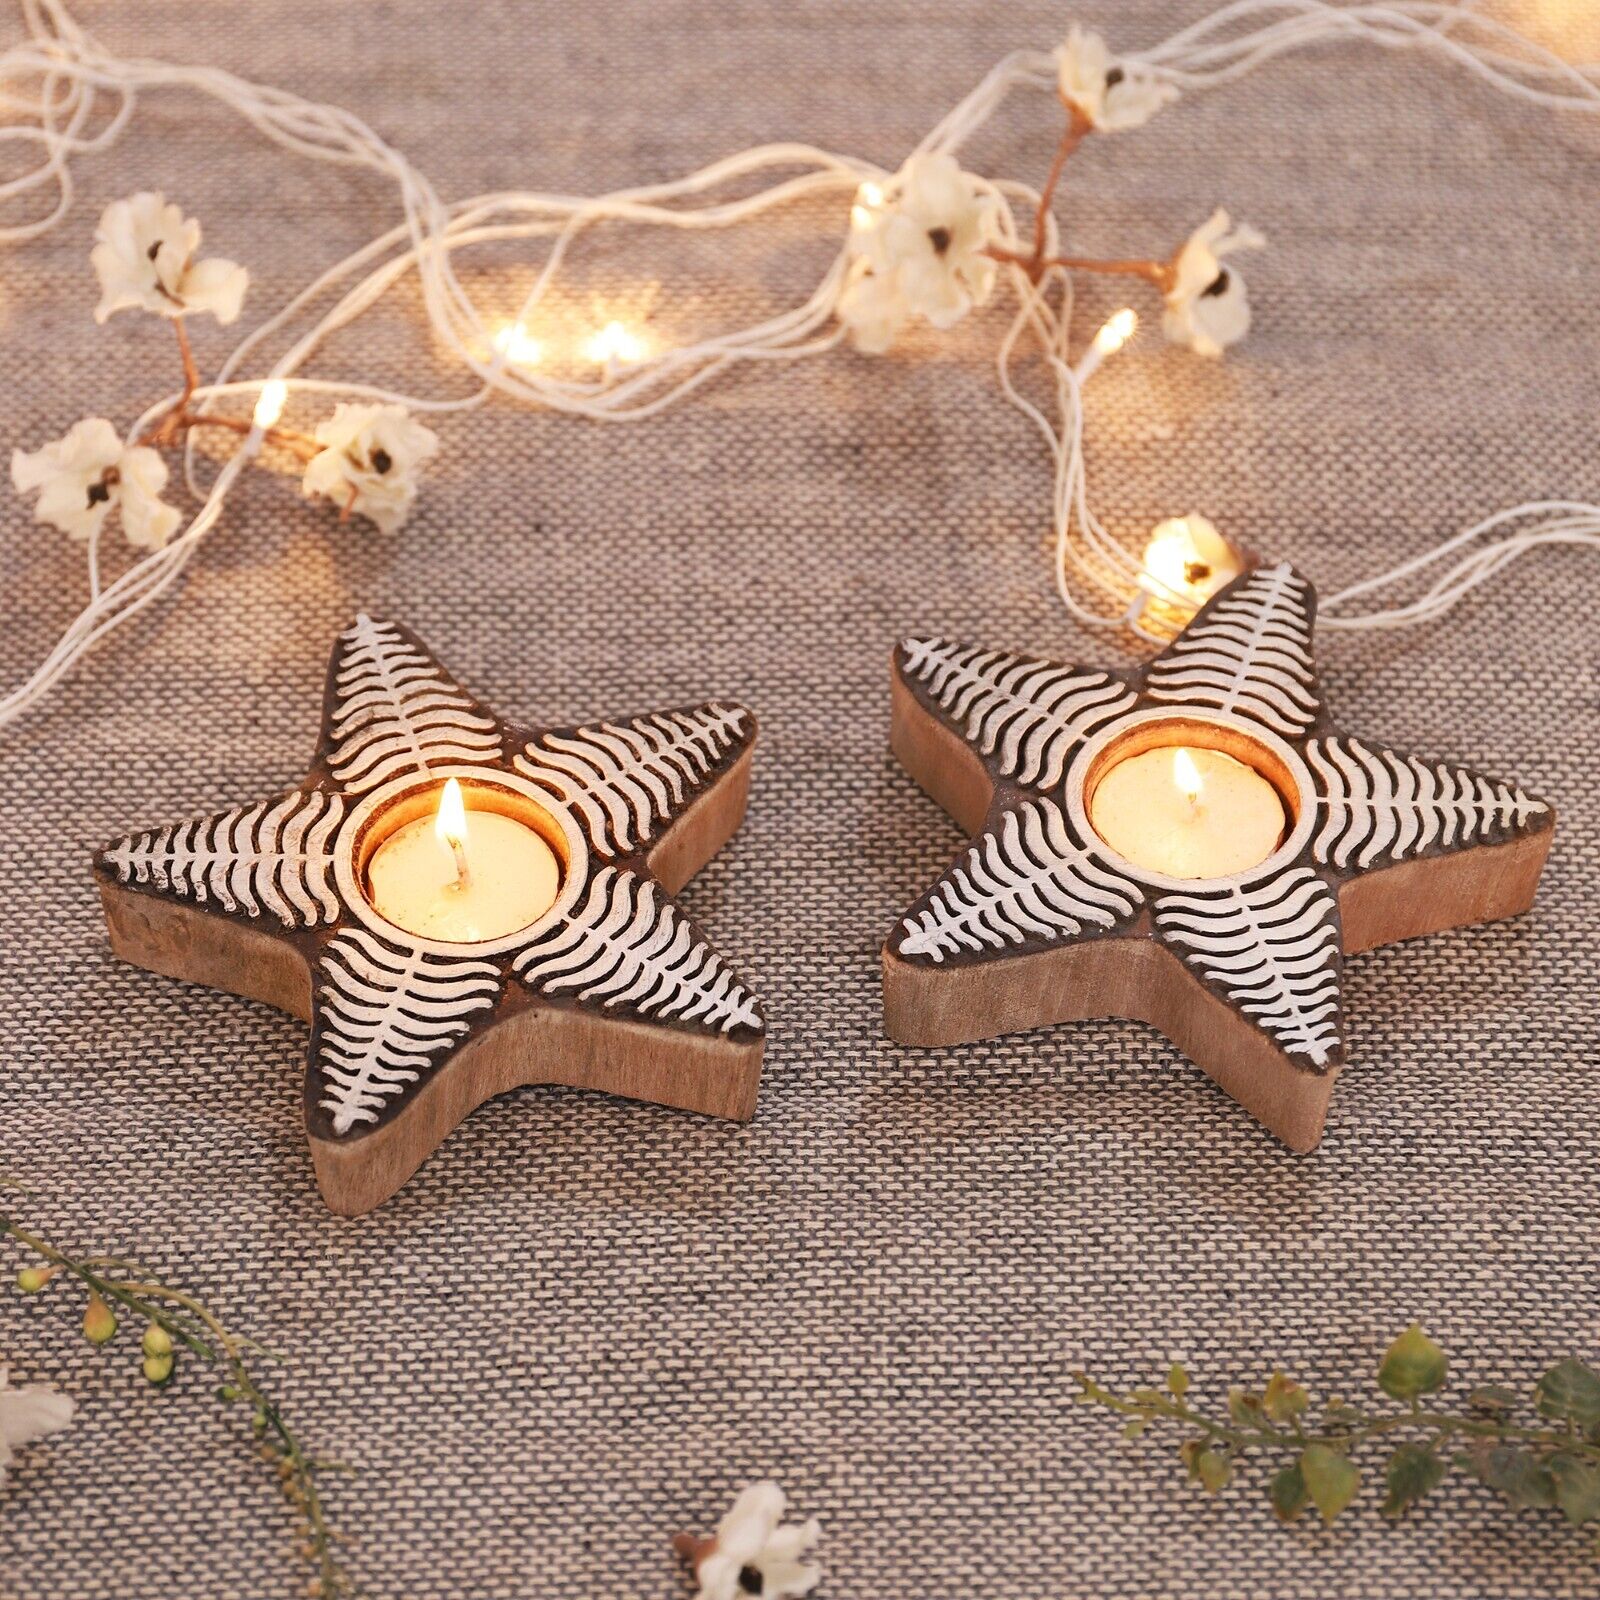 Handmade Printing Wood Block Star Stamps Hotel Table Decor Wooden Candle Holder